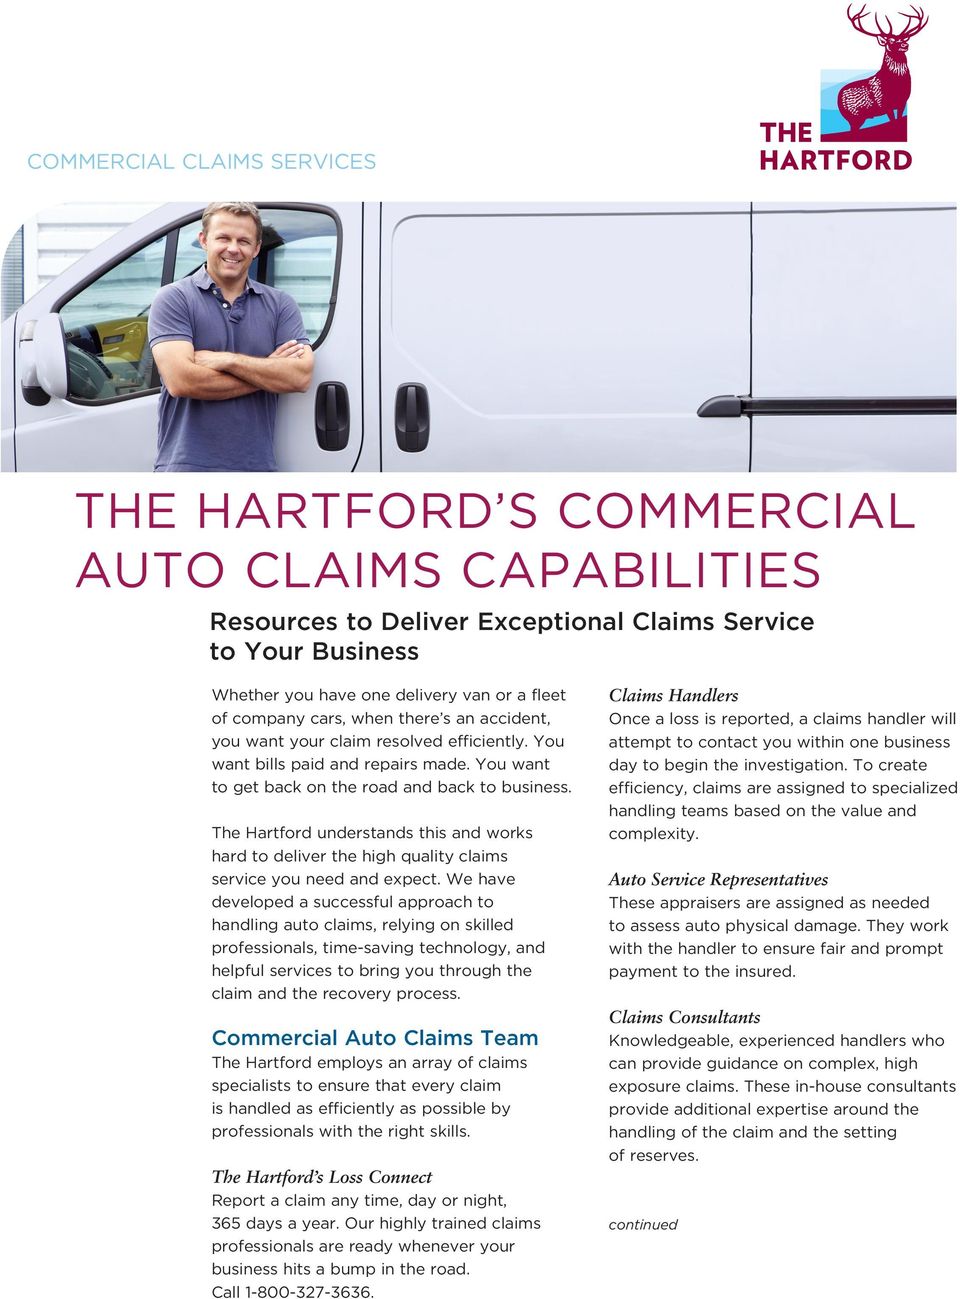 The Hartford understands this and works hard to deliver the high quality claims service you need and expect.